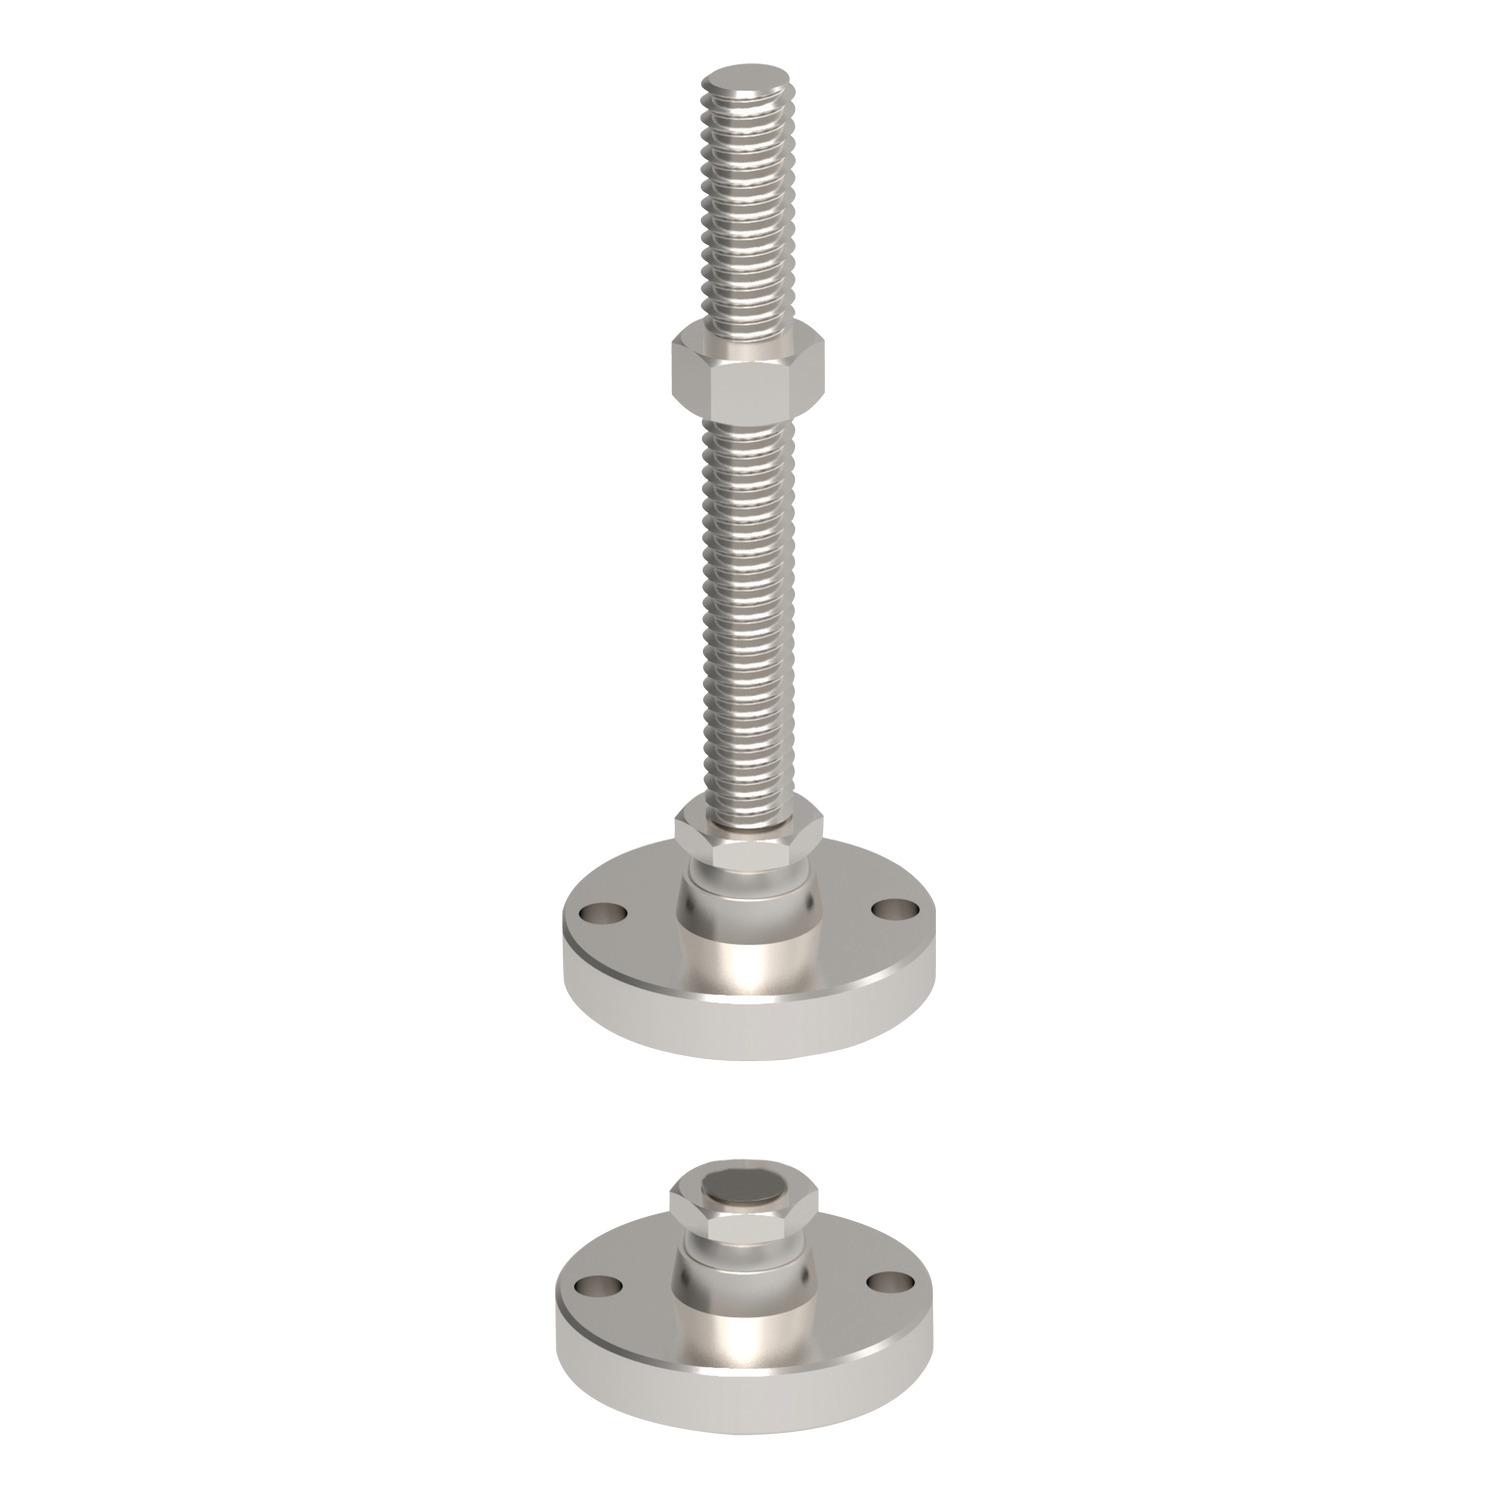 Levelling Feet - Bolt Down, Heavy Duty Our 34713 range features bolt down pads as well as a full assembly of heavy duty bolt down Machine Feet.